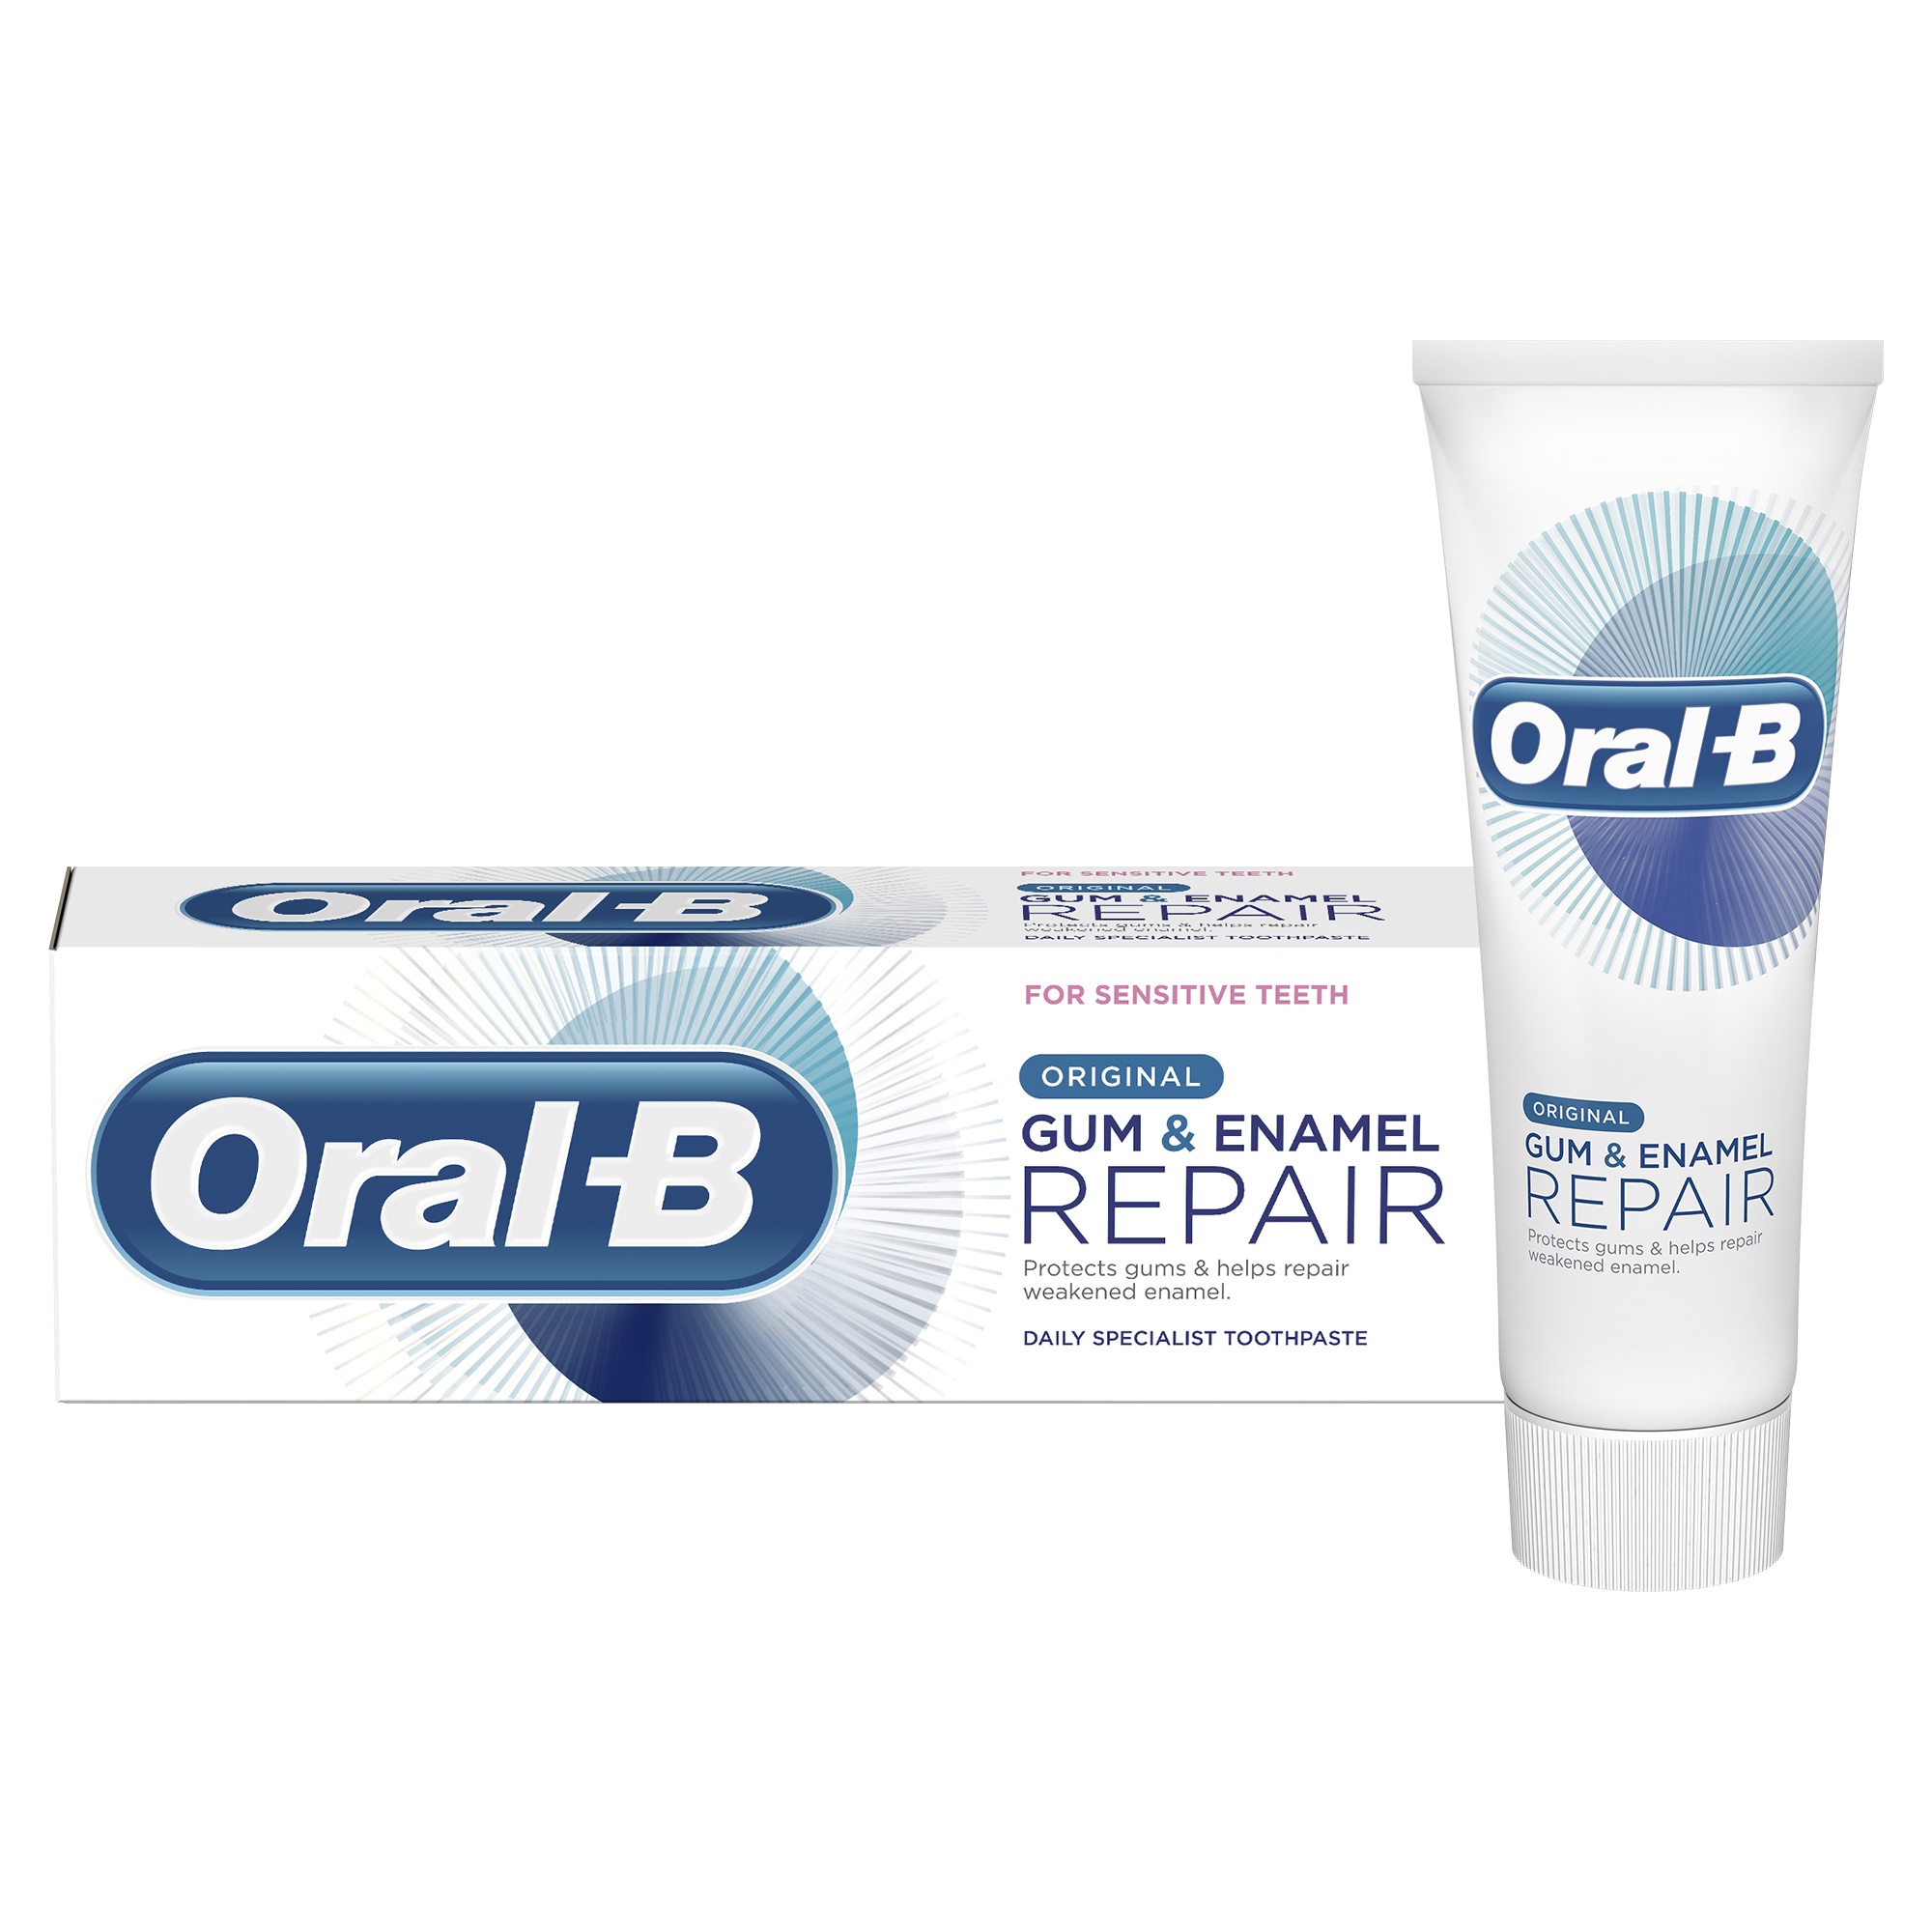 Oral B Toothpaste Benefits